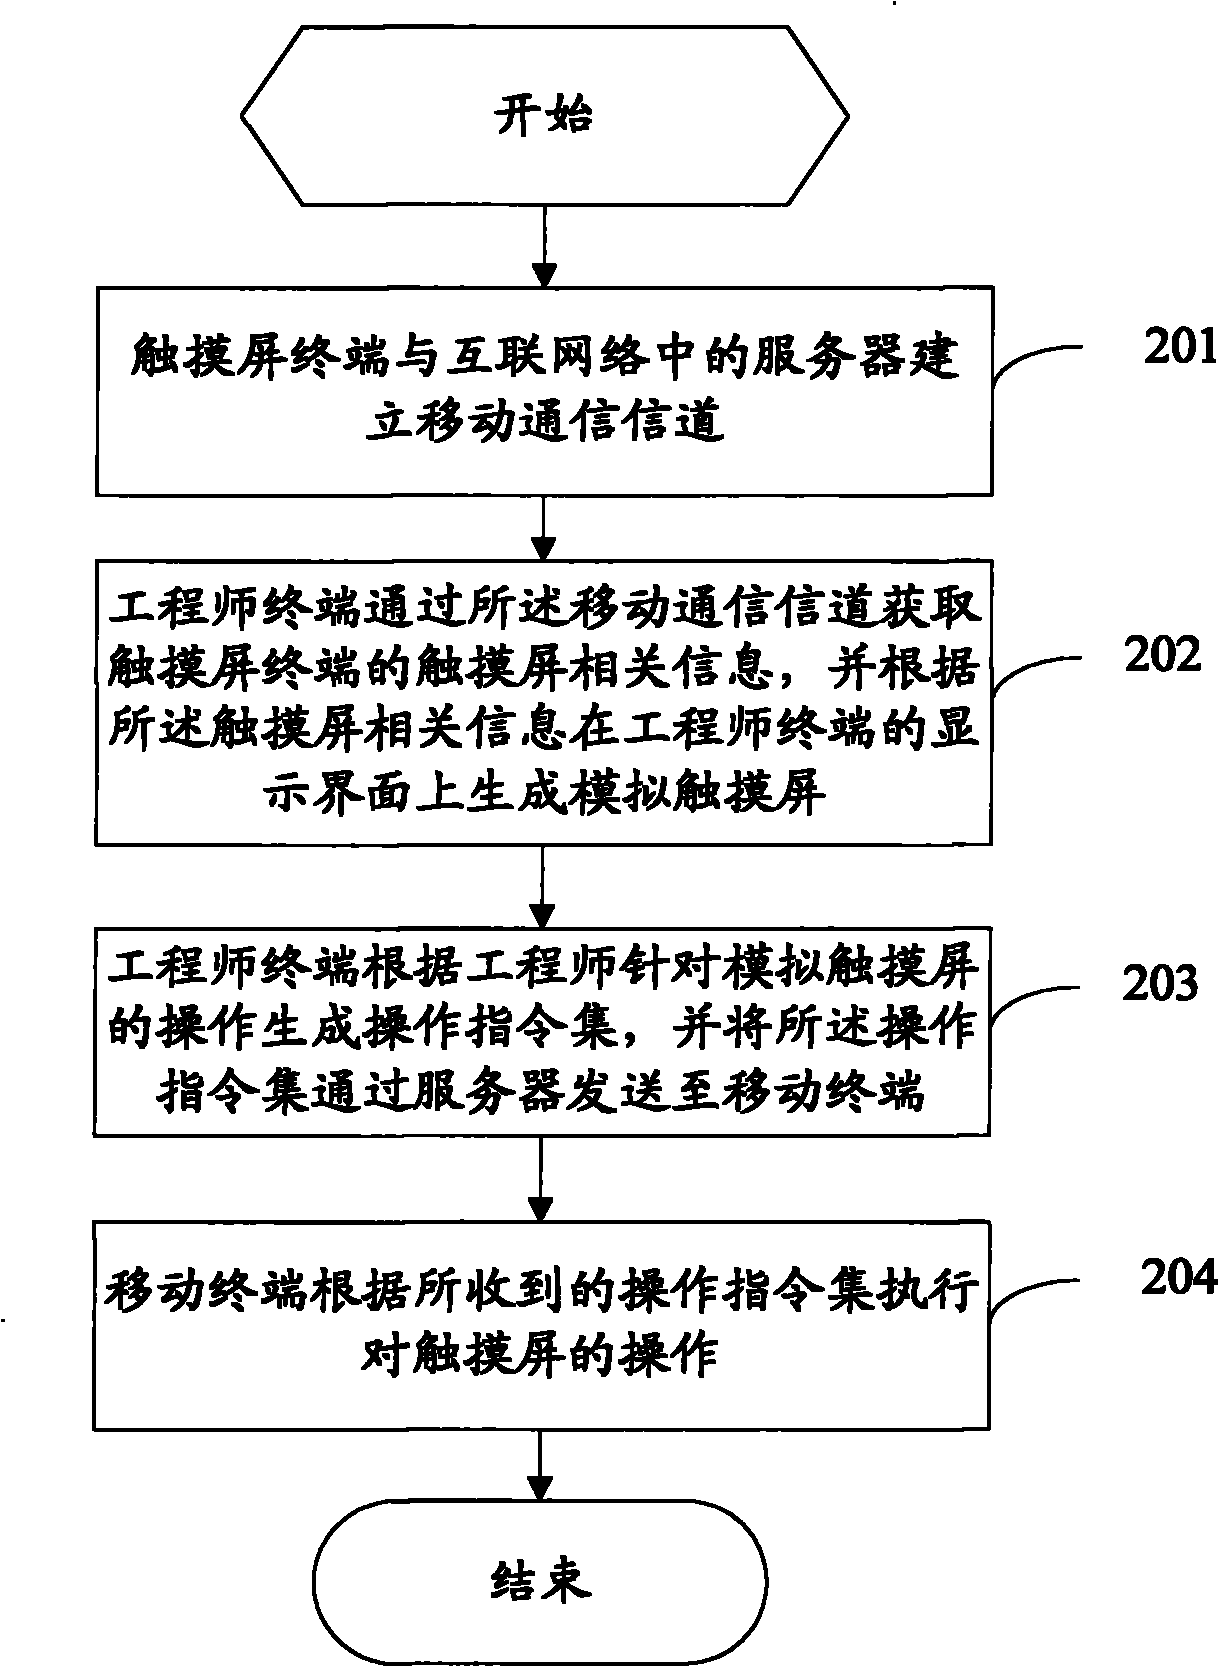 Method and system for providing remote services for touch screen terminal